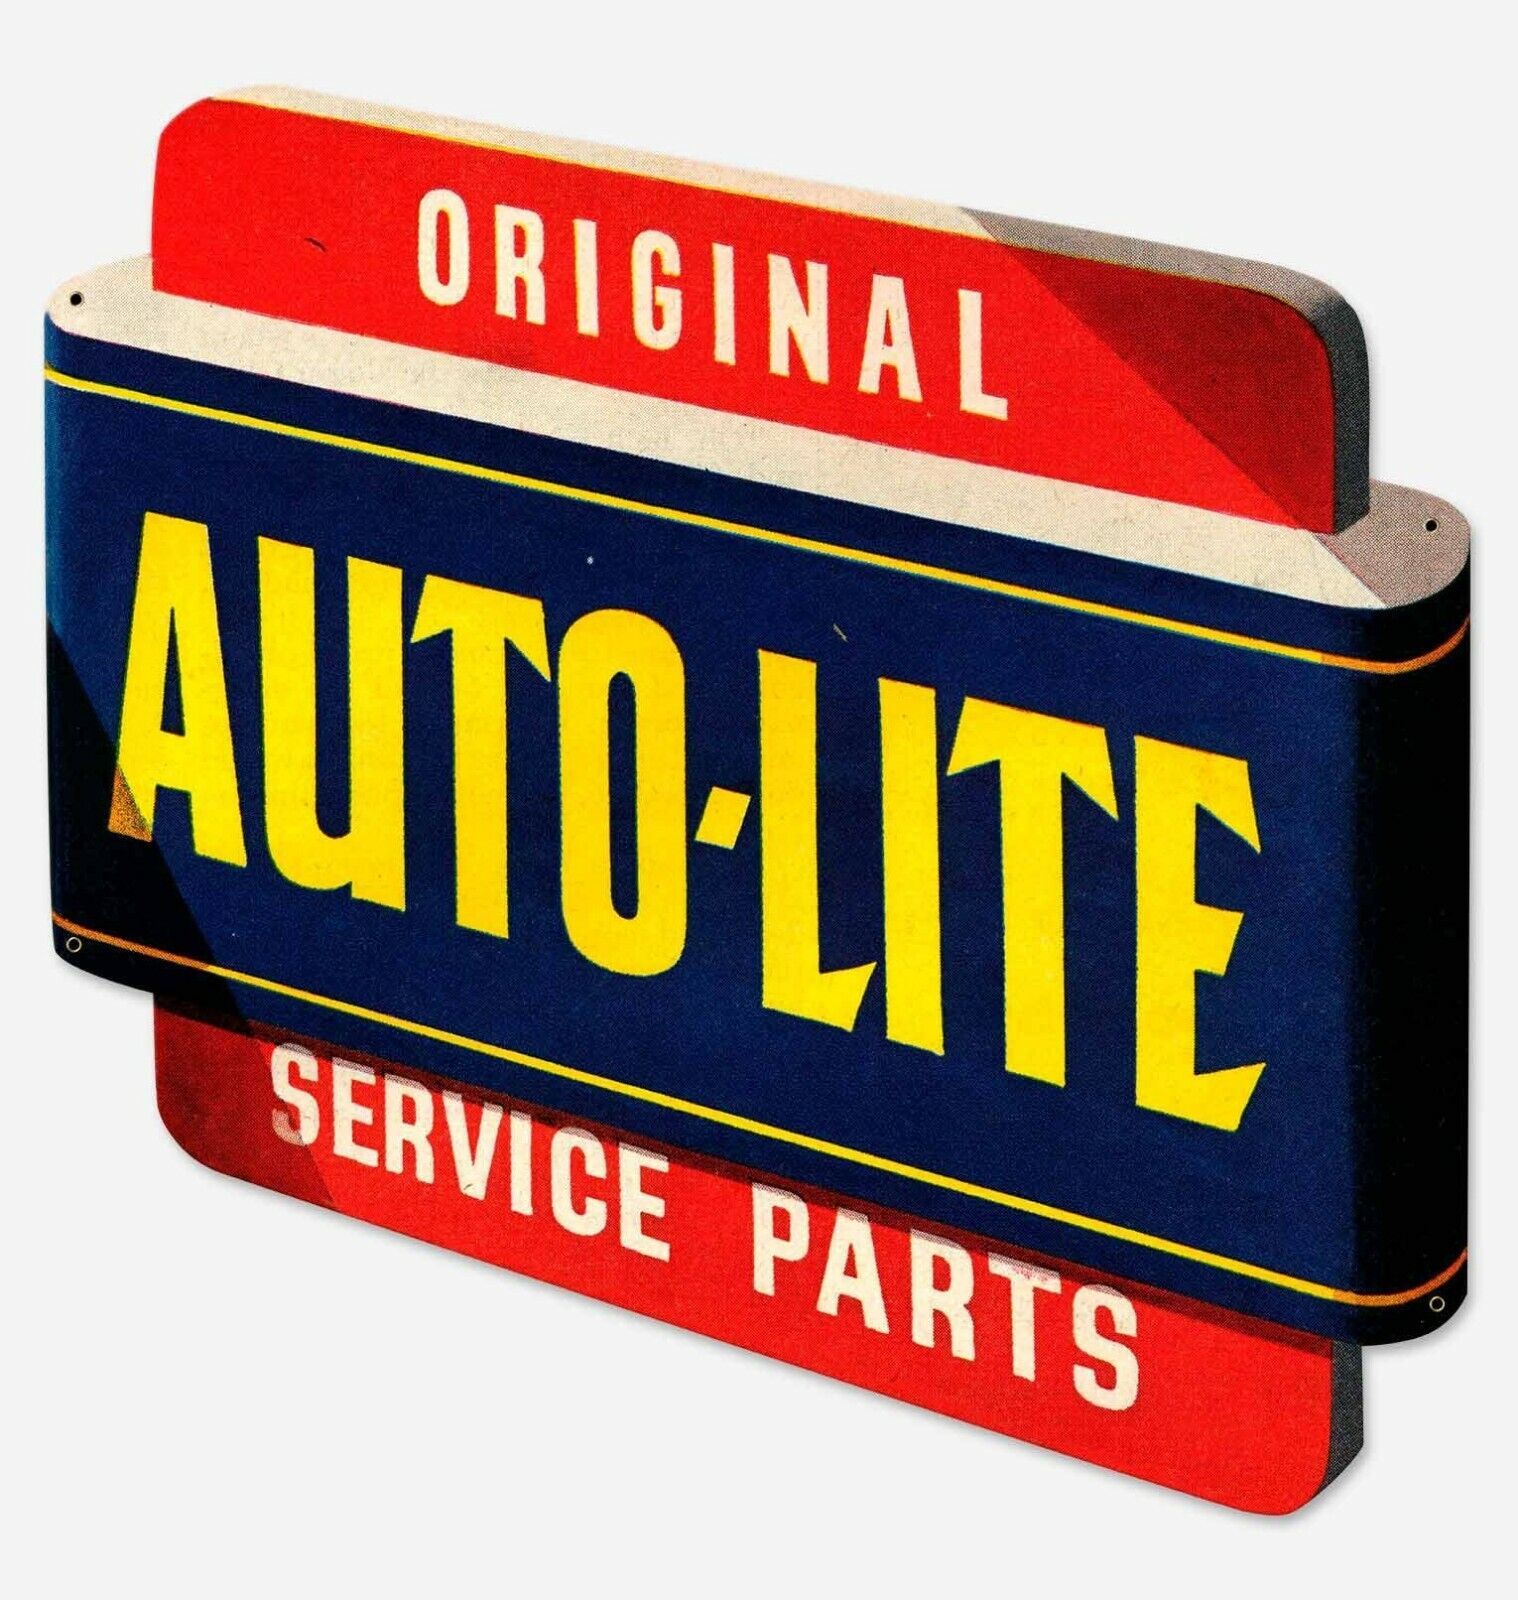 Primary image for Auto-Lite Service Parts Laser Cut Metal Sign